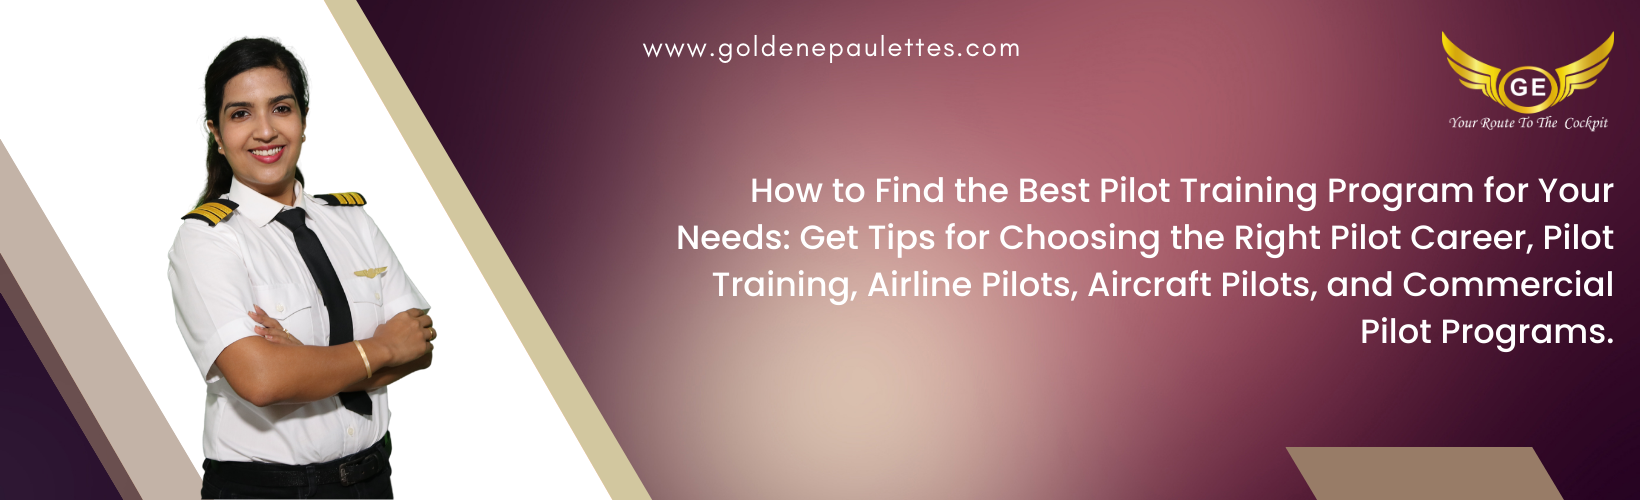 How to Choose the Right Pilot Training Program